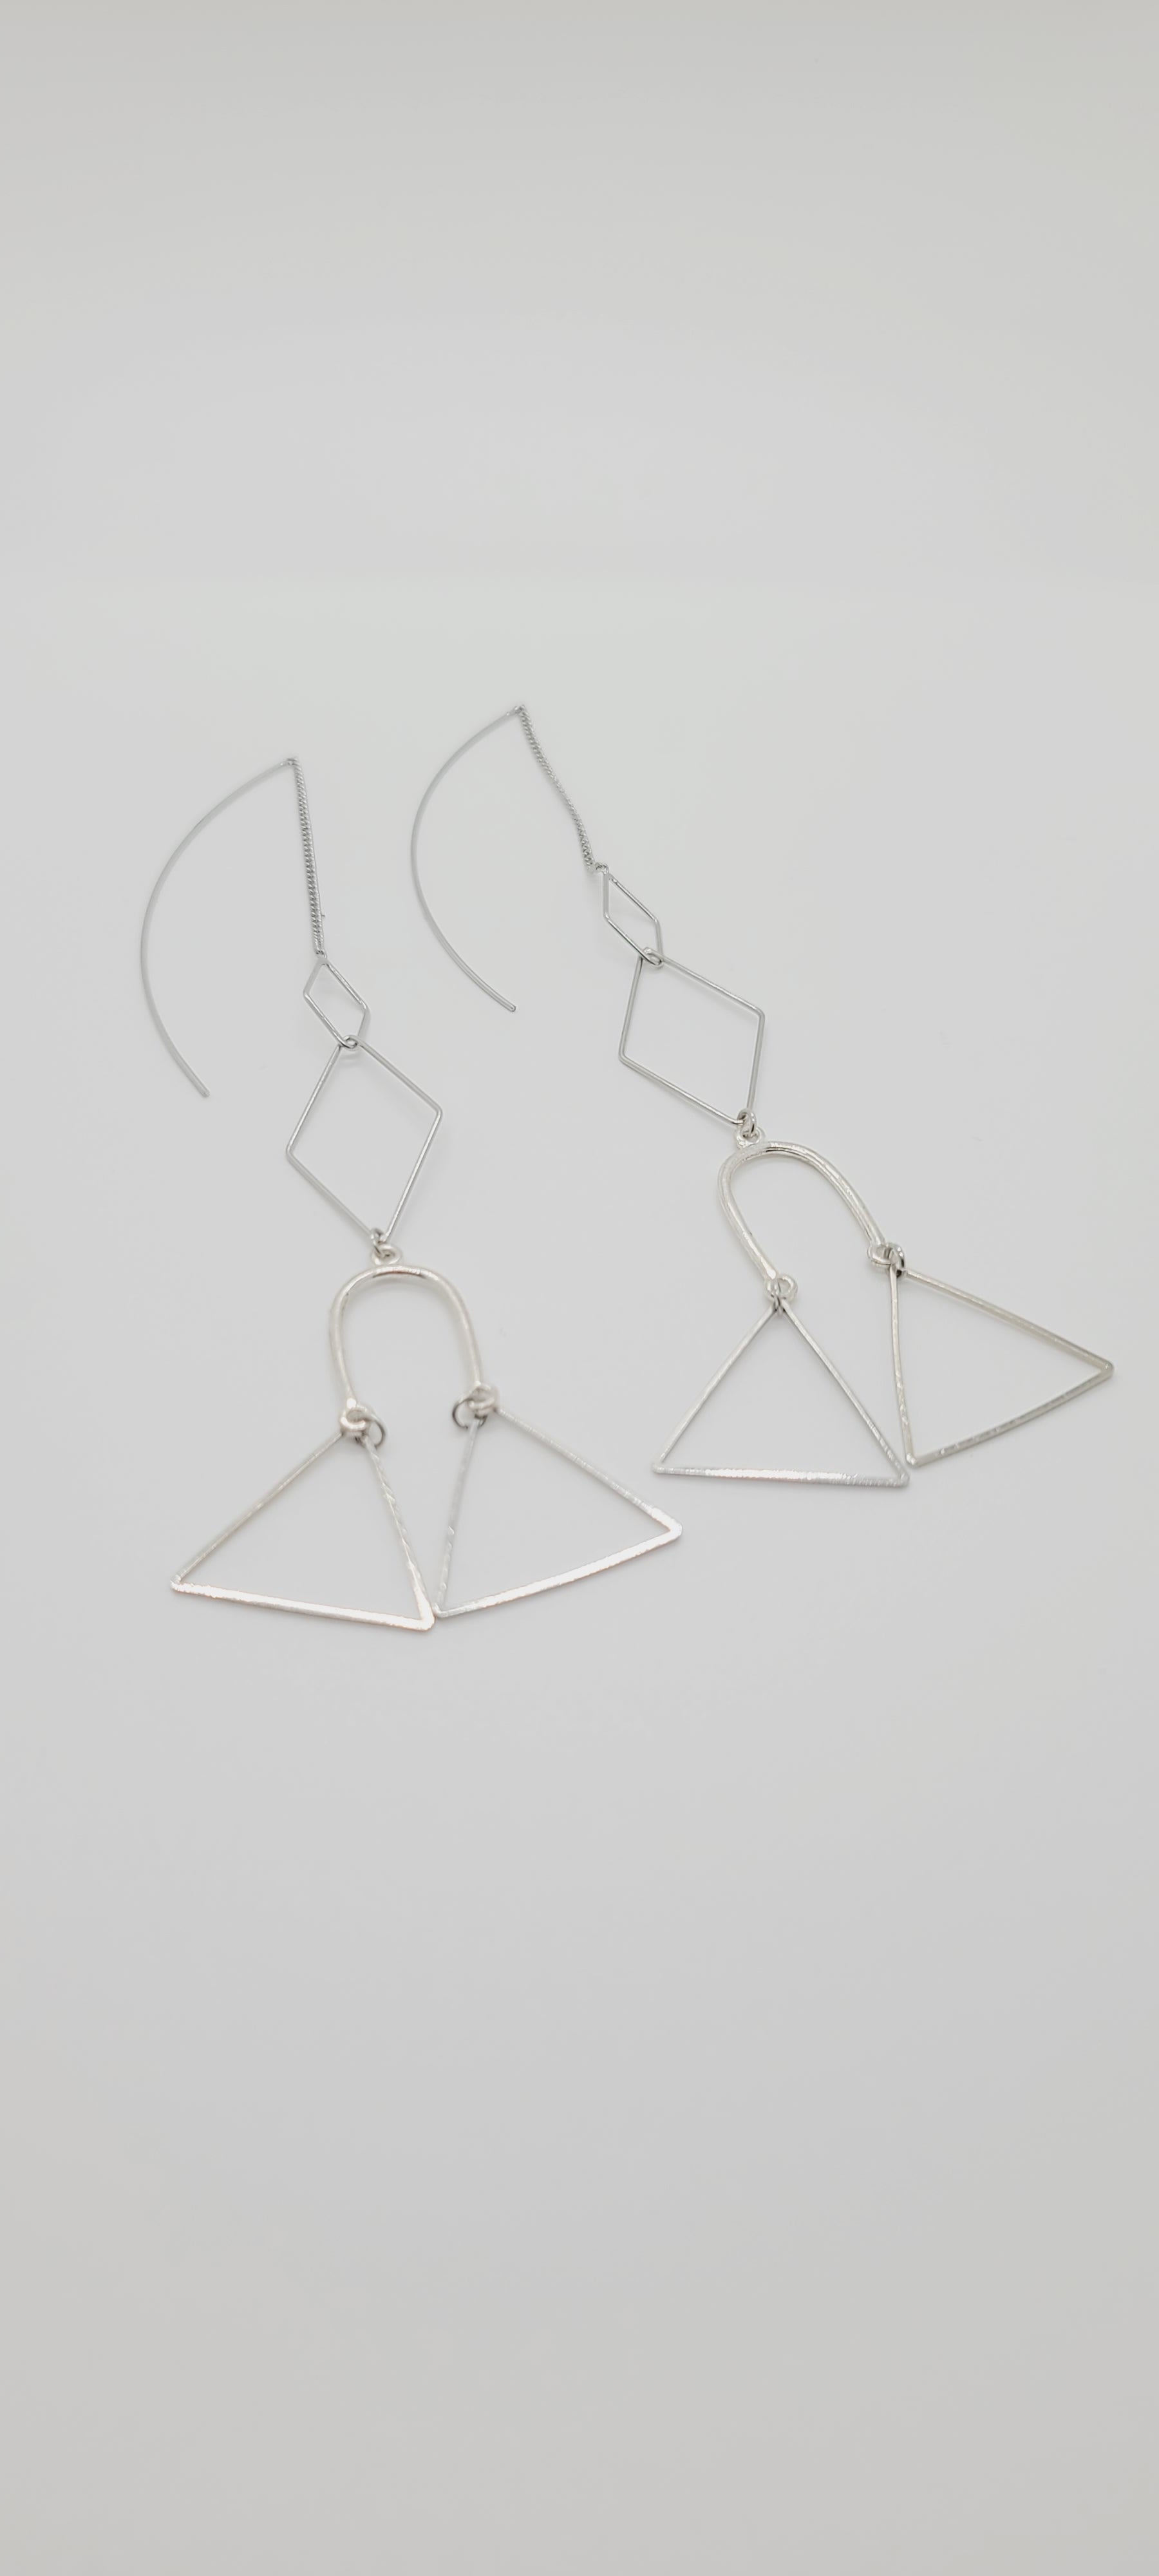 Length: 6 inches | Weight: 0.2 ounces  Distinctly You! These silver wire hook earrings are made with silver chains, silver charms in shapes of diamonds, triangles, and horseshoes.